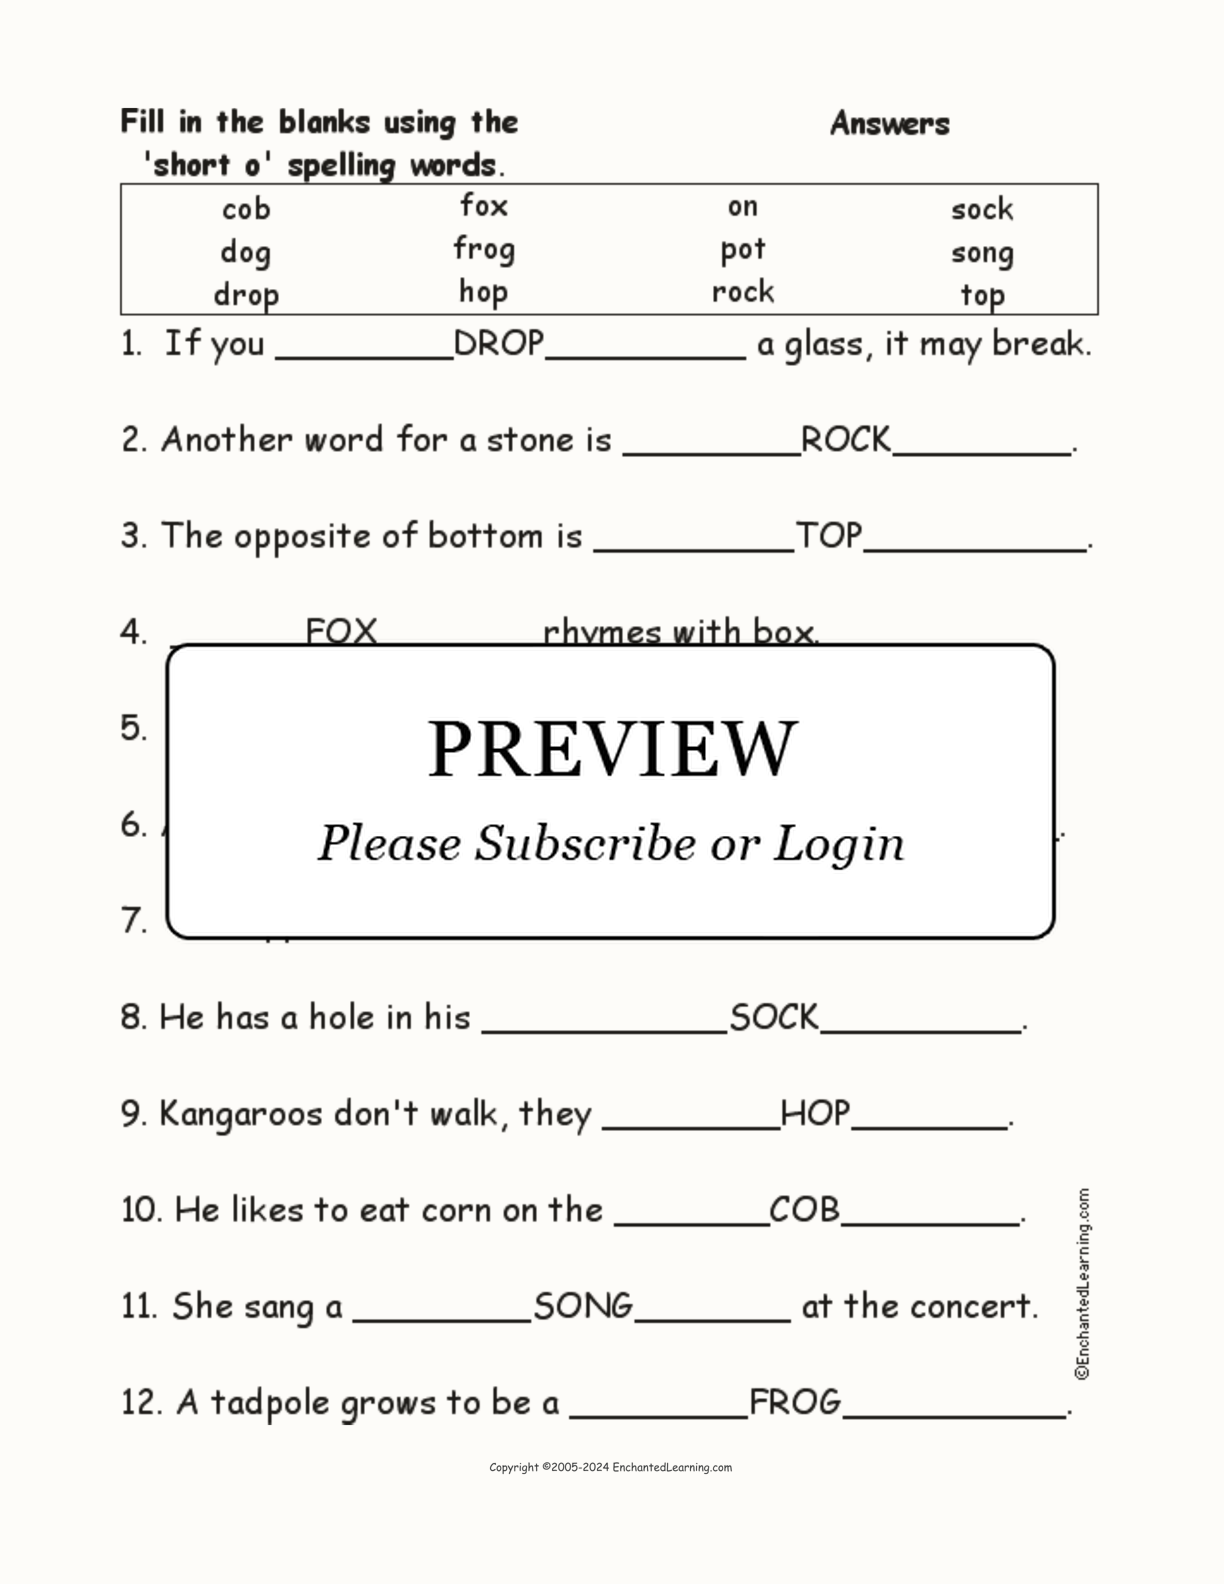 Short O: Spelling Word Questions interactive worksheet page 2